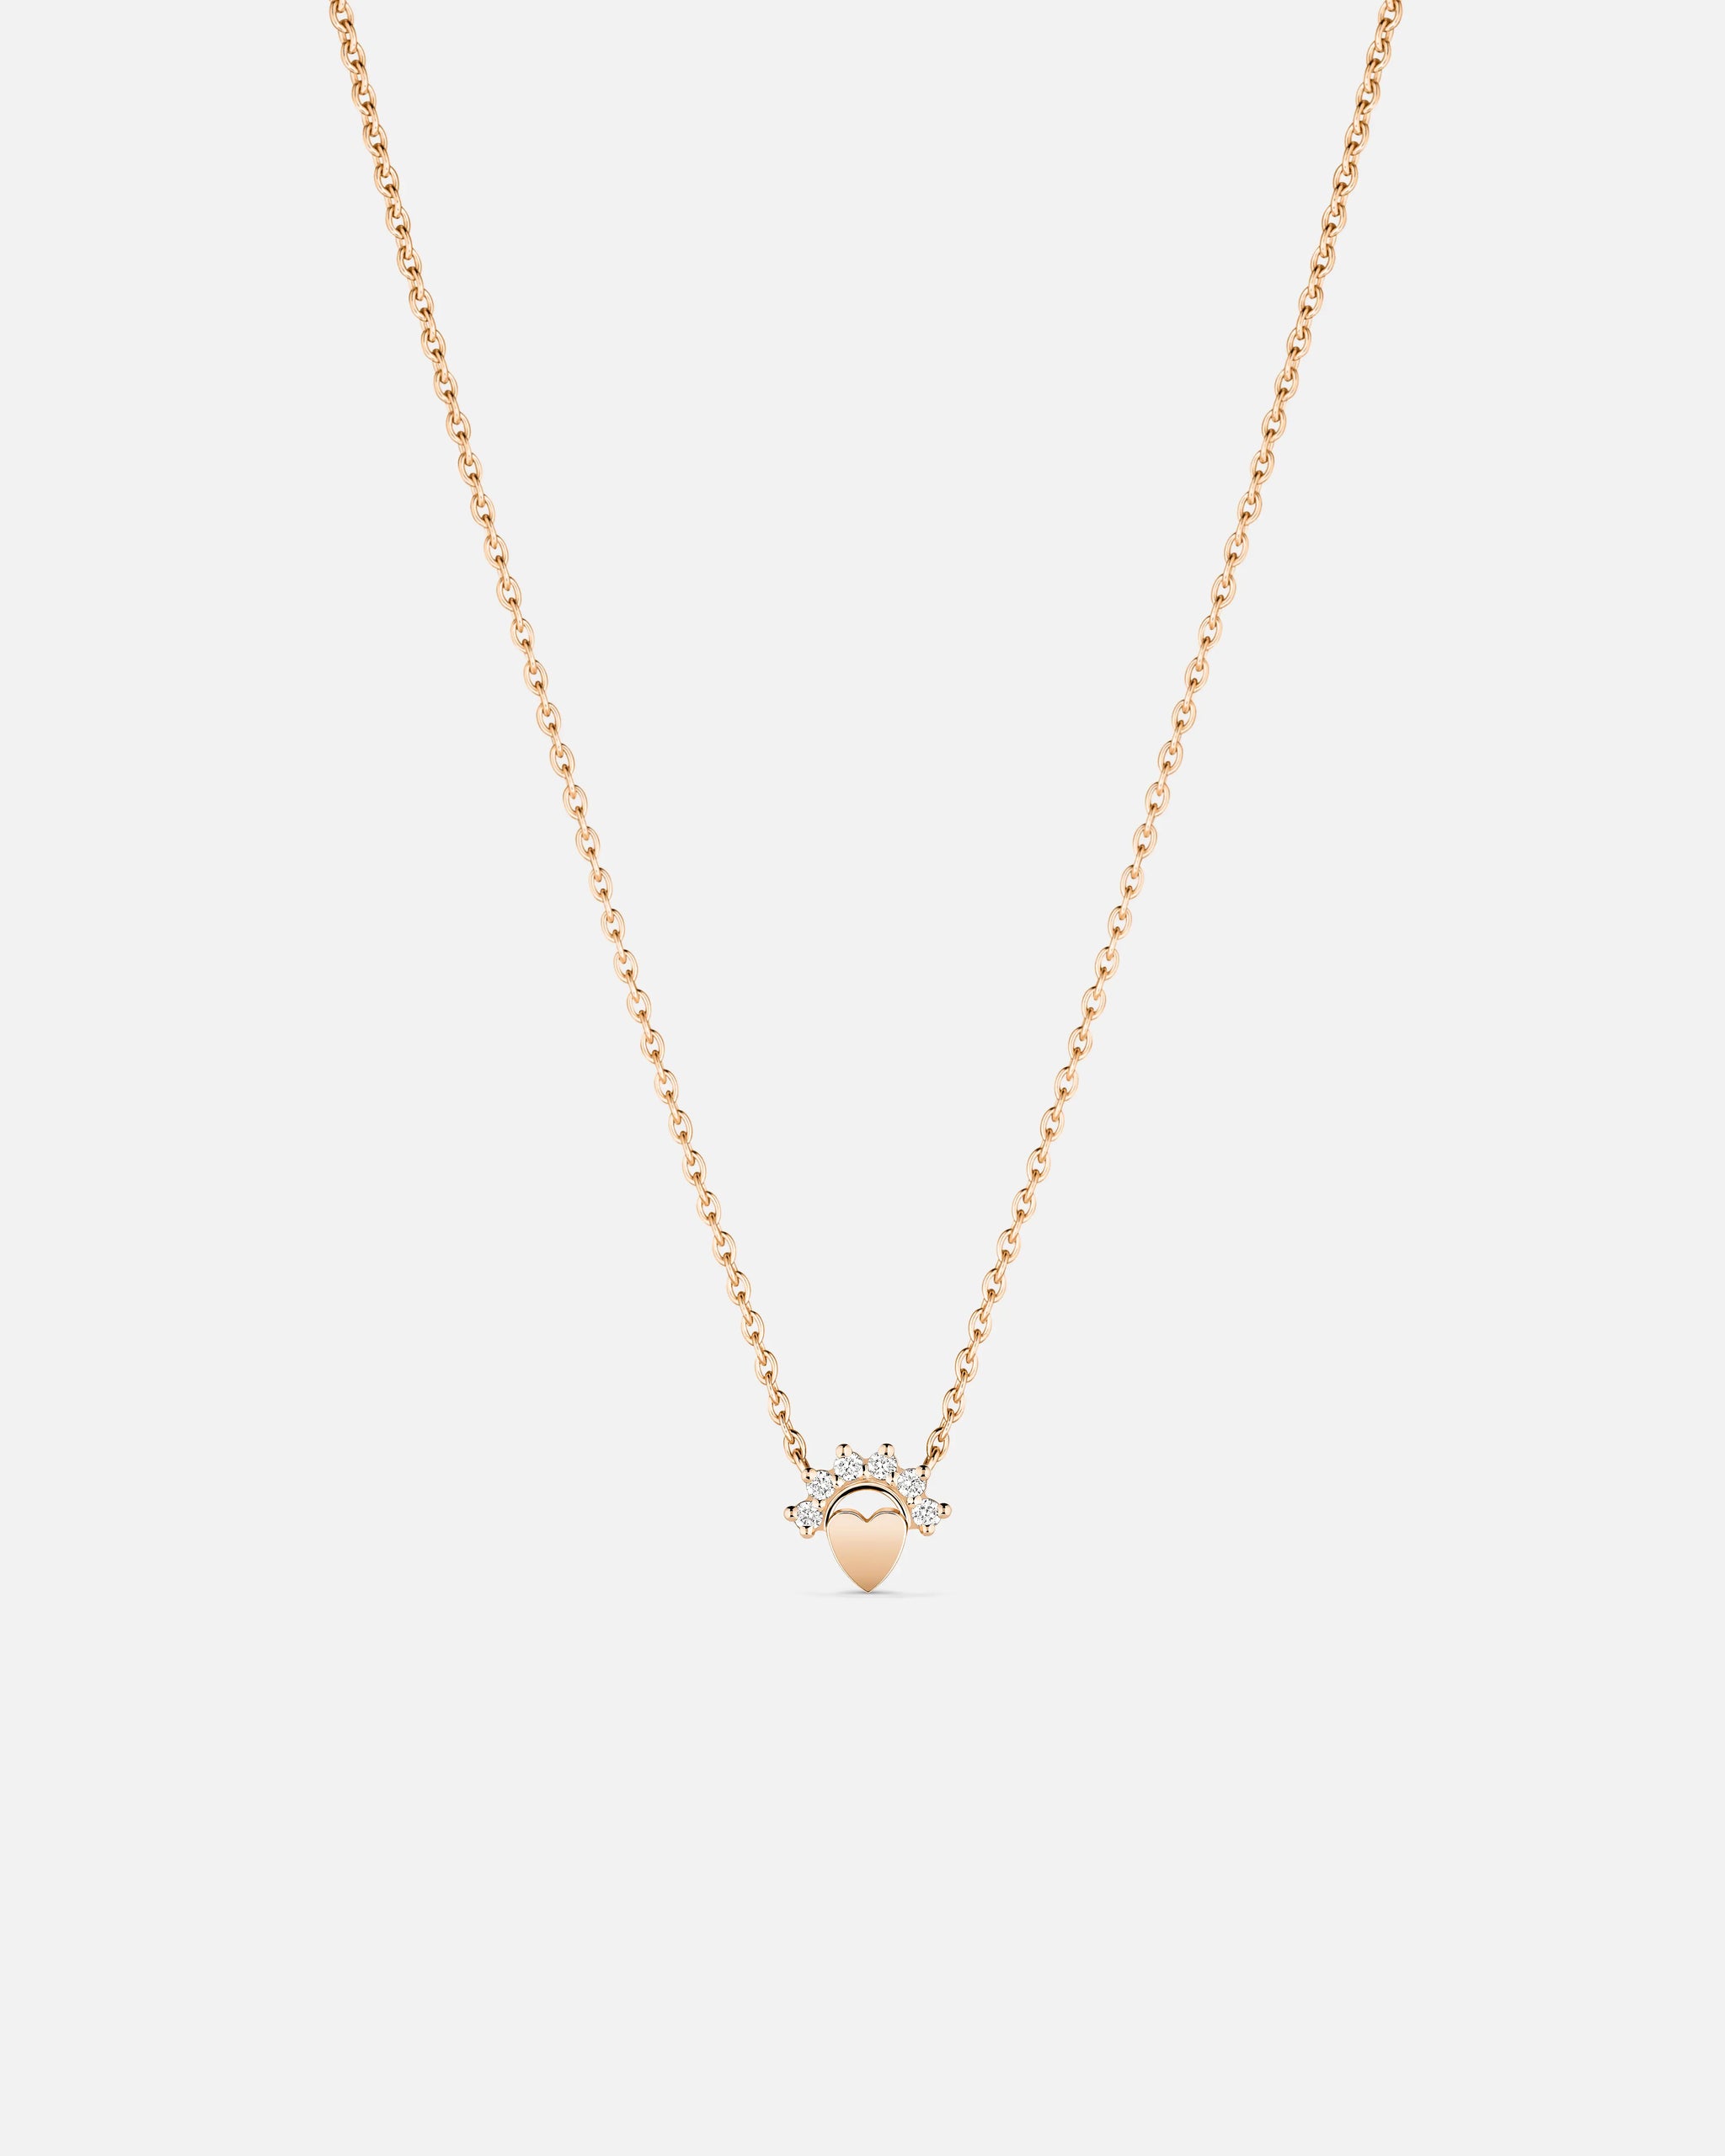 Small Love Pendant in Rose Gold - 1 - Nouvel Heritage